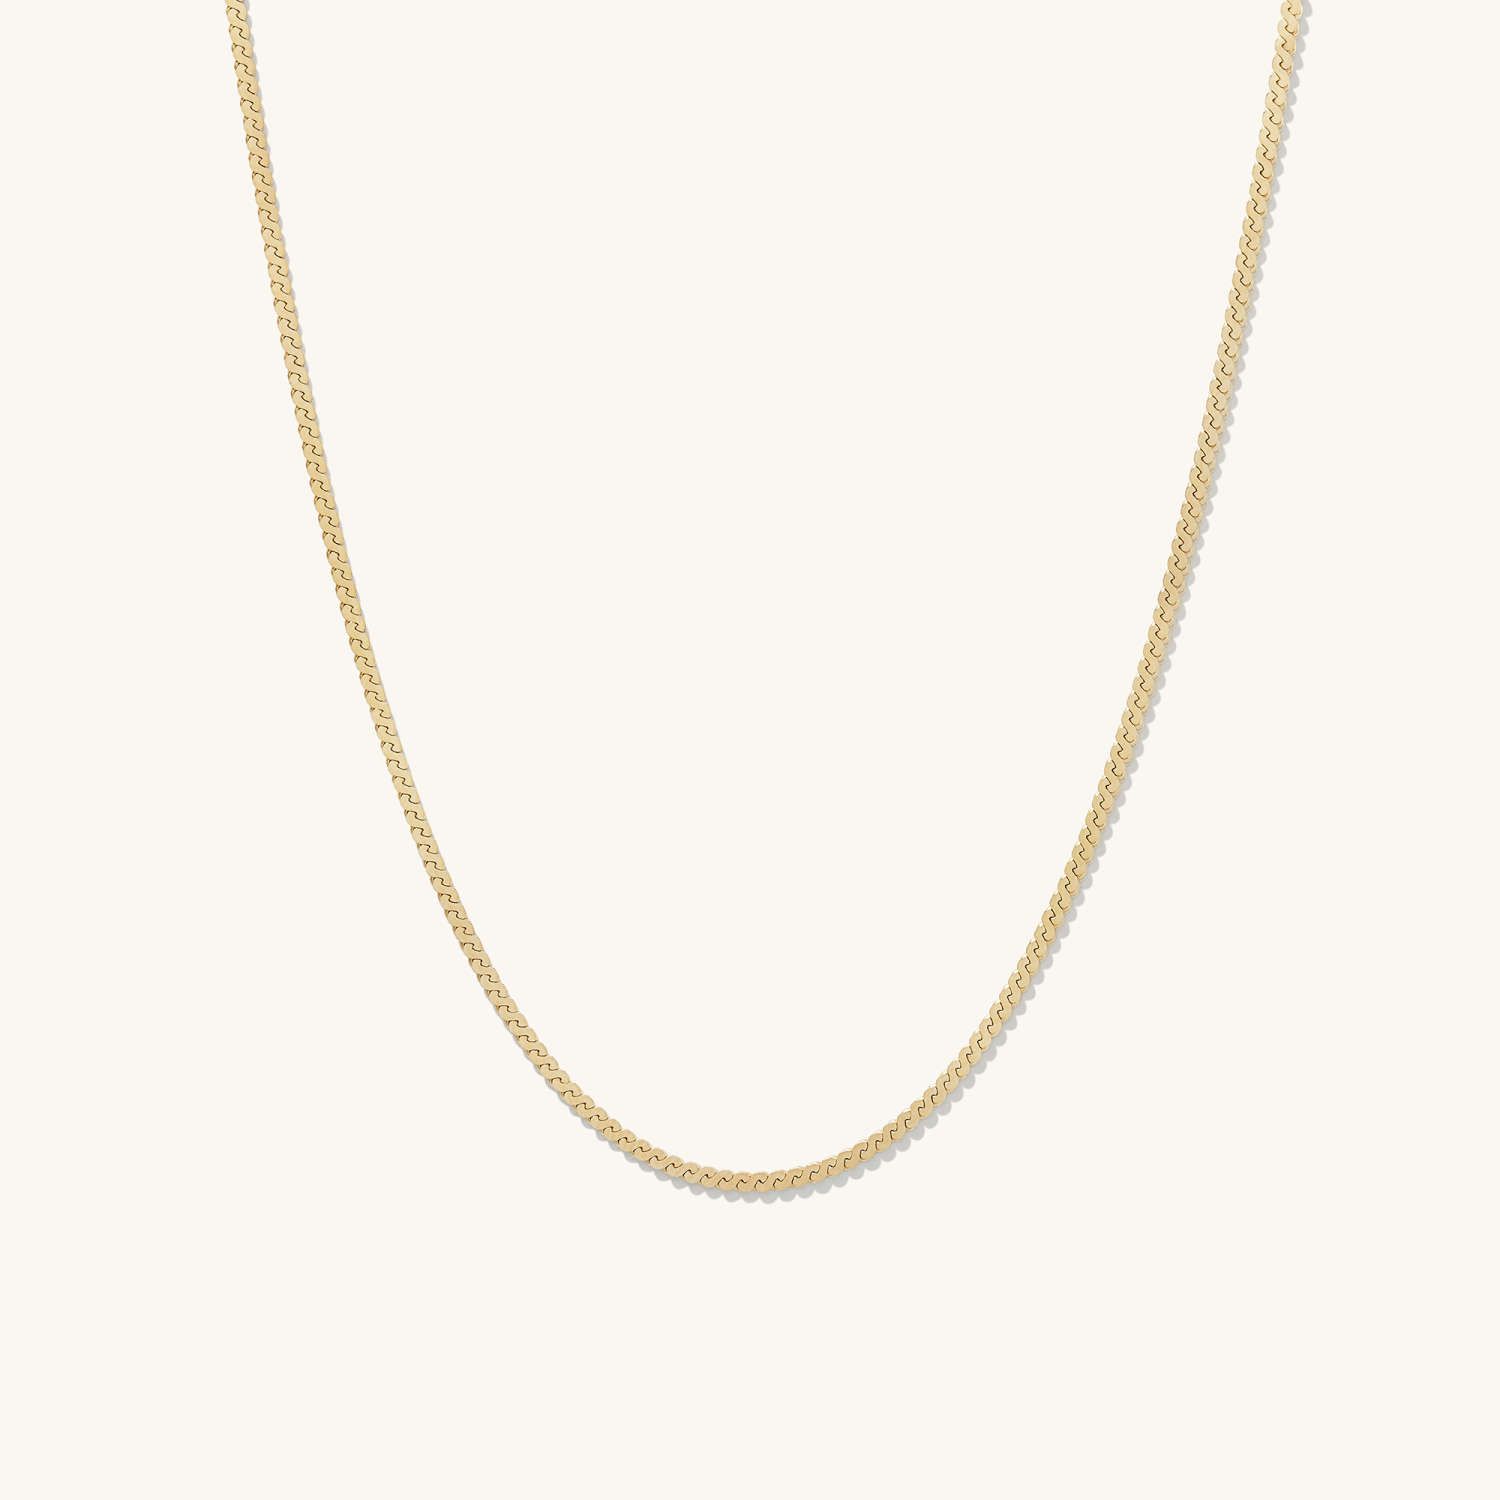 Serpentine Chain Necklace - From $500 | Mejuri (Global)